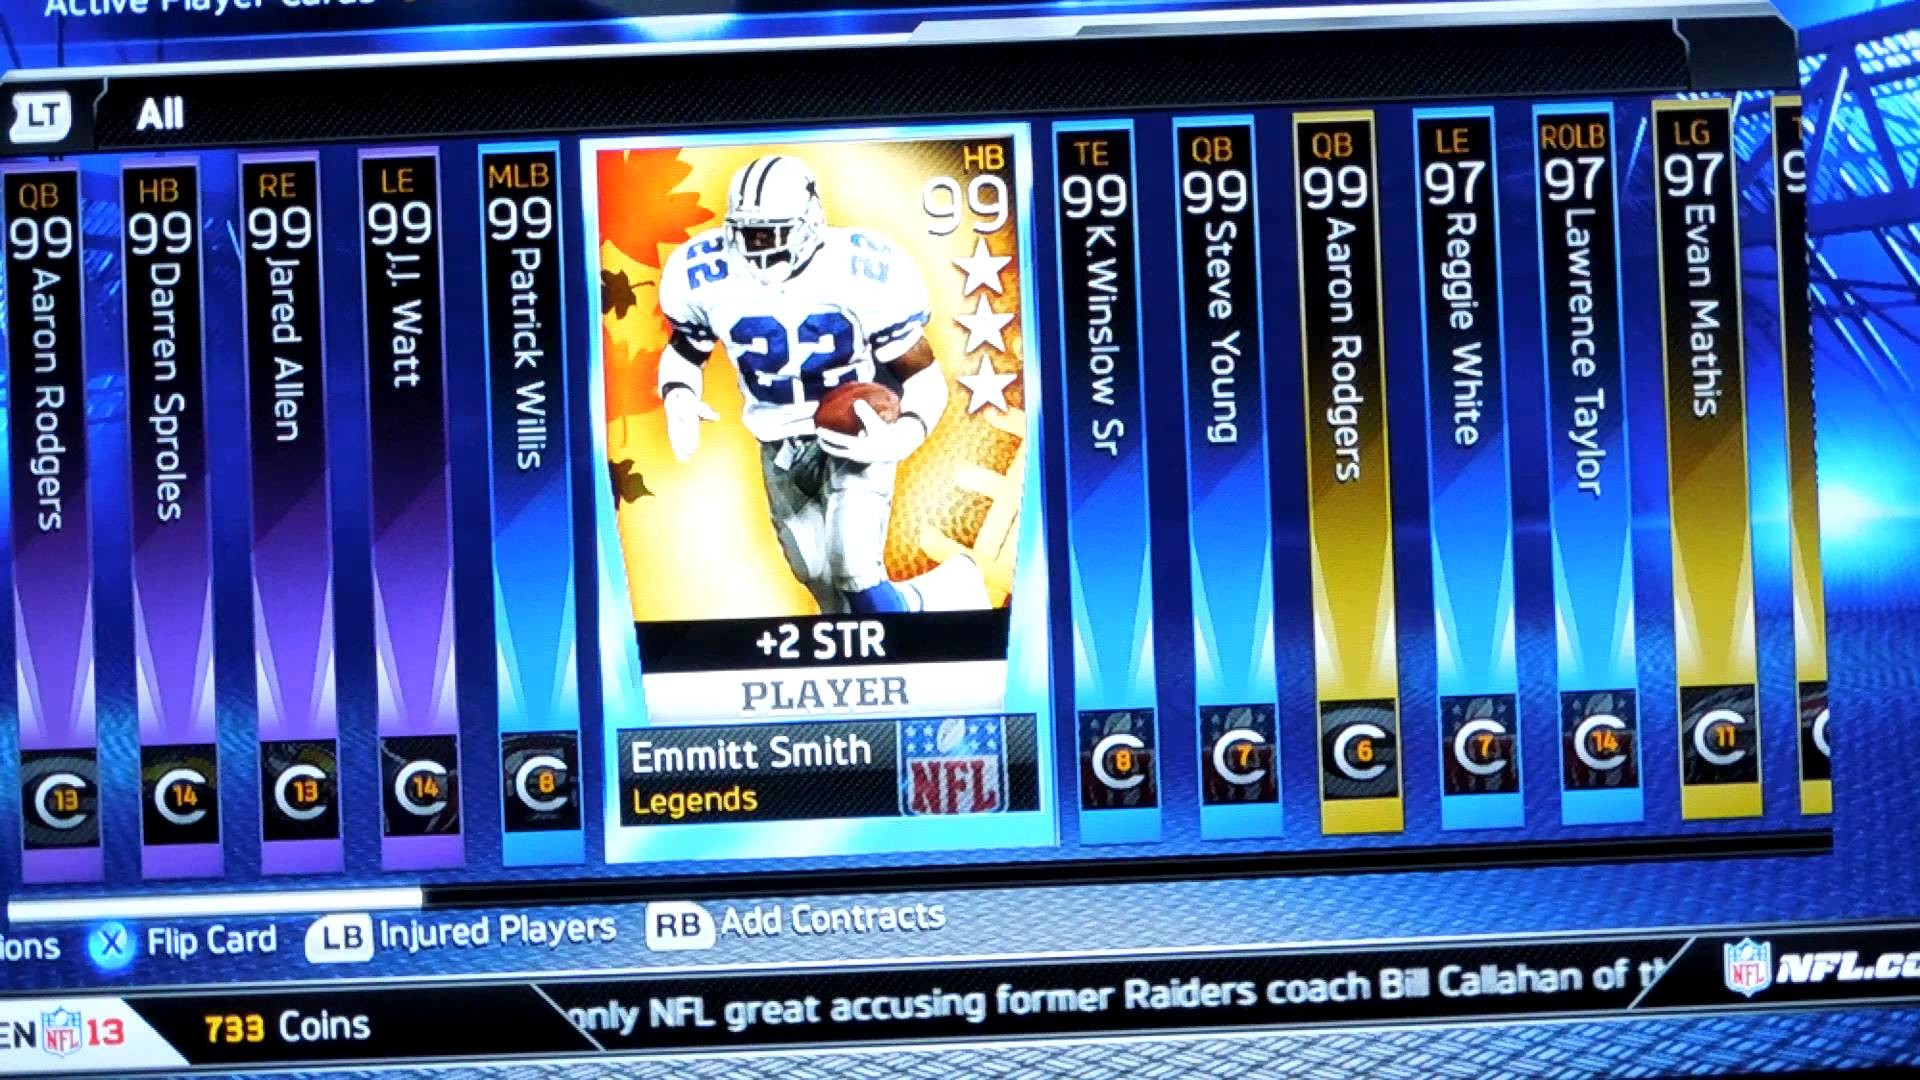 1920x1080 Madden 13 Ultimate Team Coin Glitch 3 Star Emmitt Smith Giveaway - YouTube